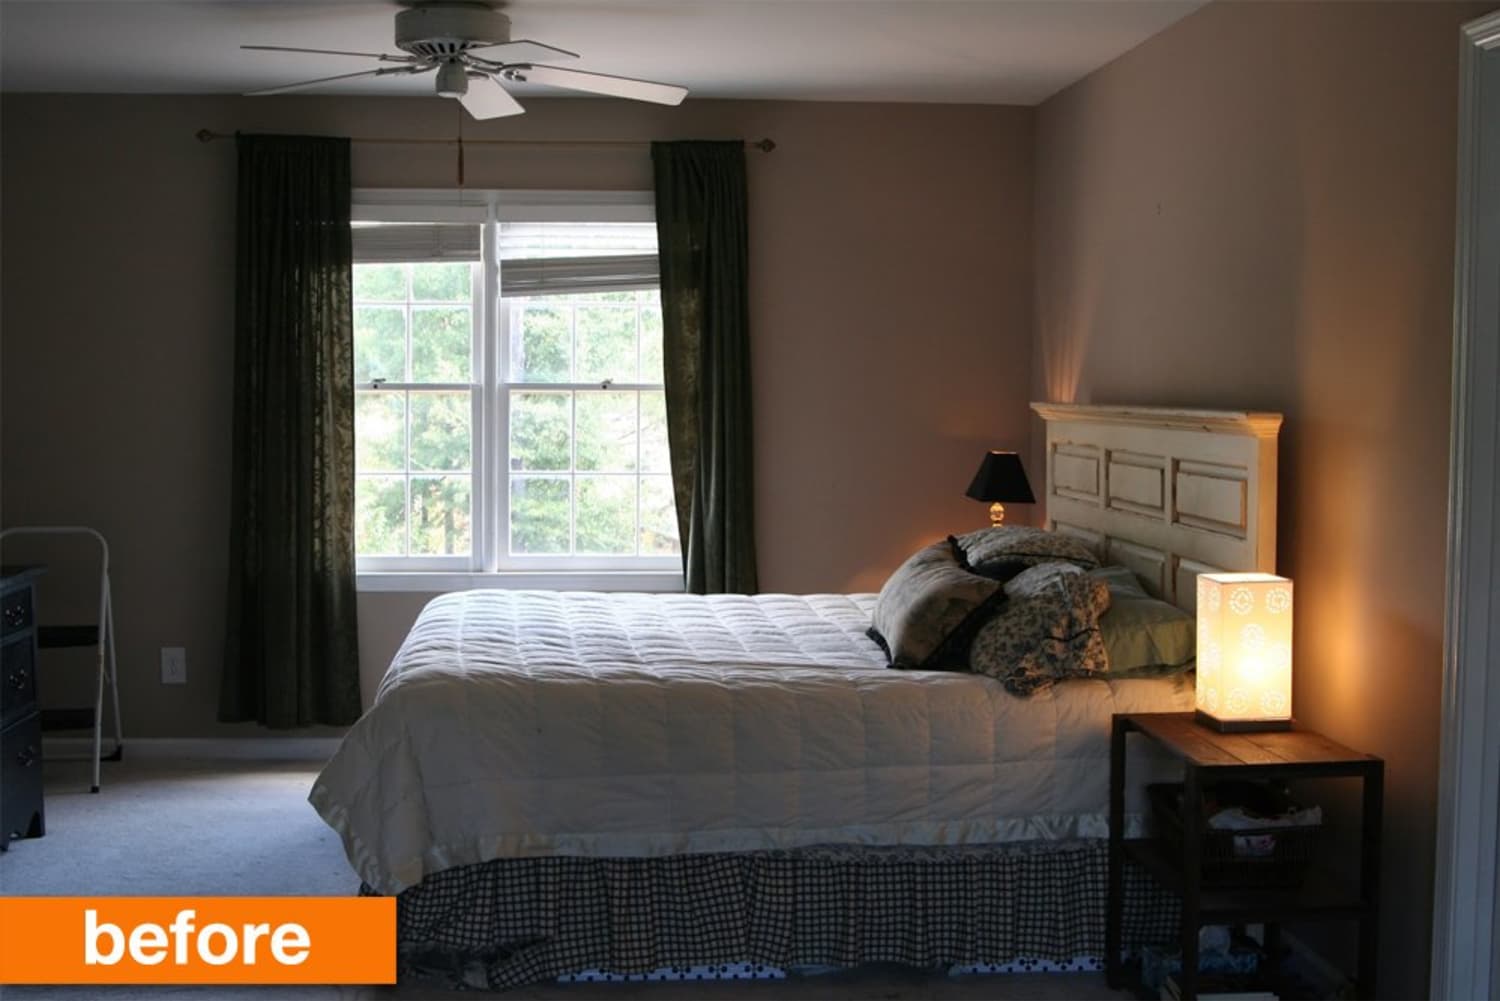 Before & After: A Bedroom Gets Finished With Fresh Paint and Flea Market Finds